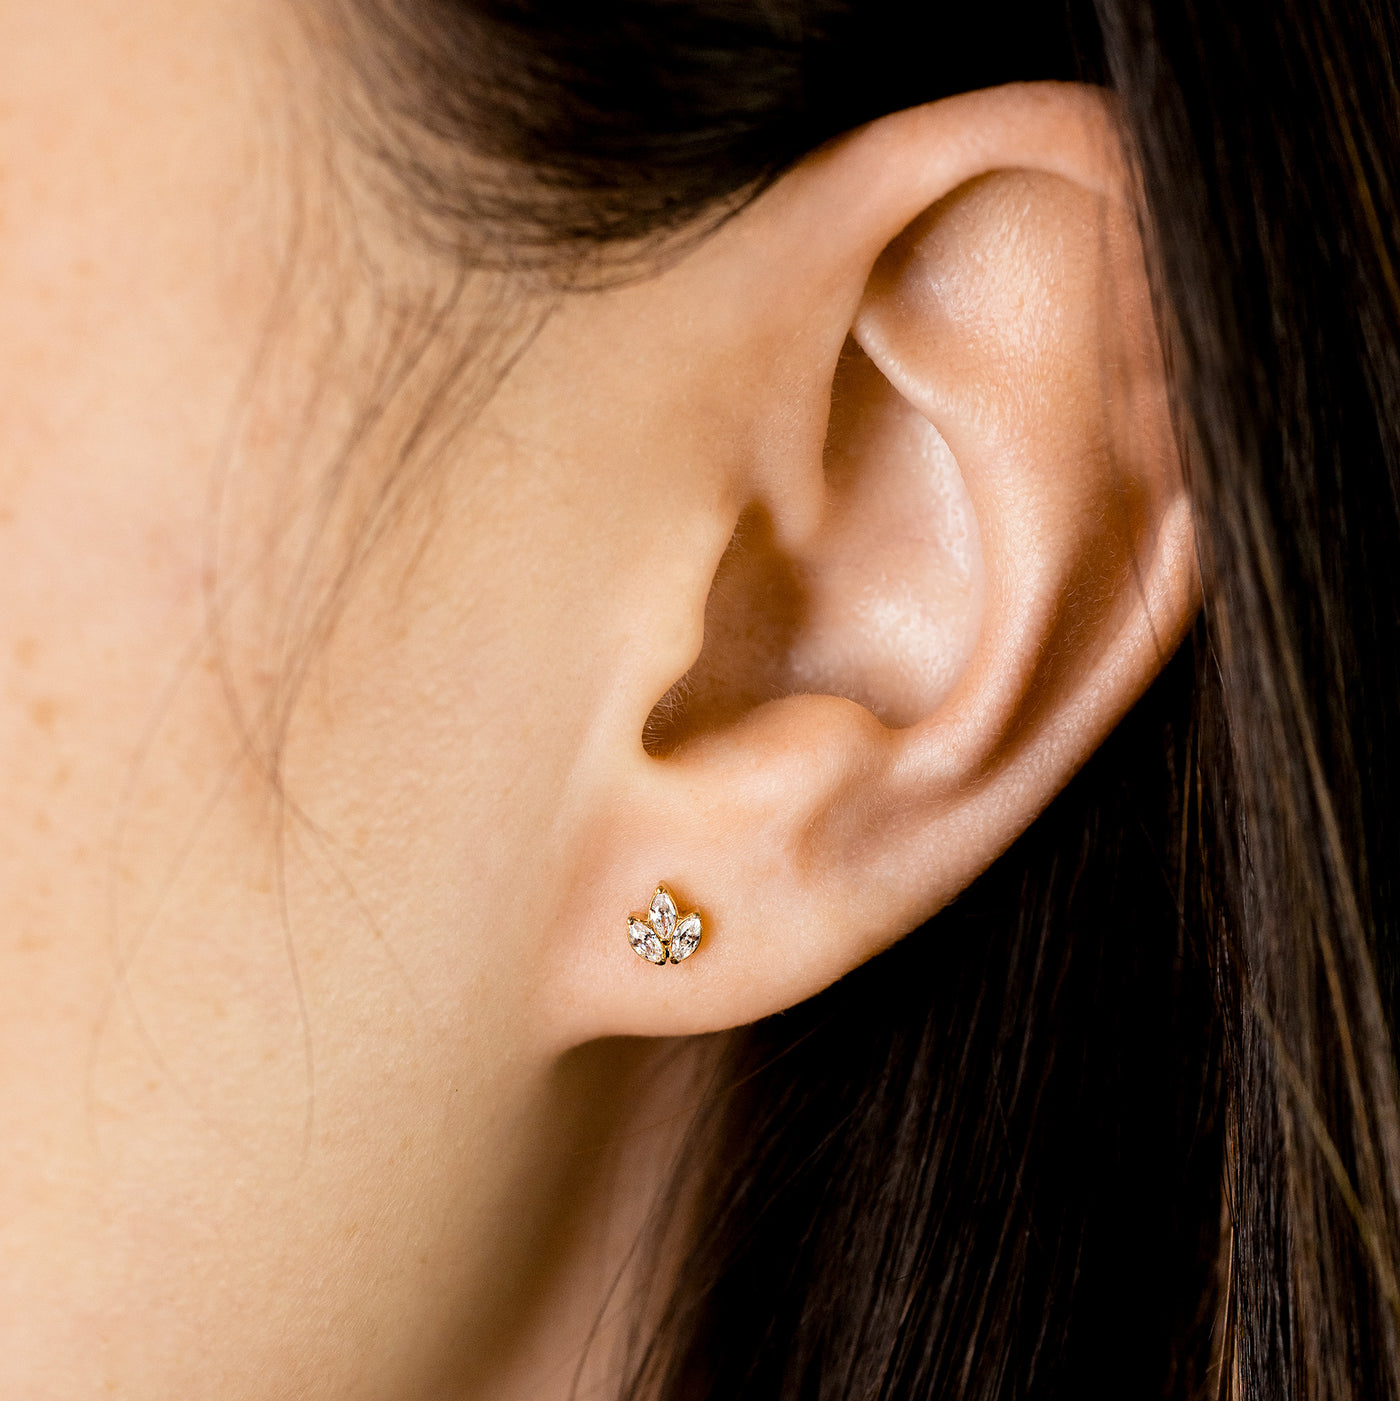 Marquise Leaf Flat Back Earrings - Three Inlaid Crystals